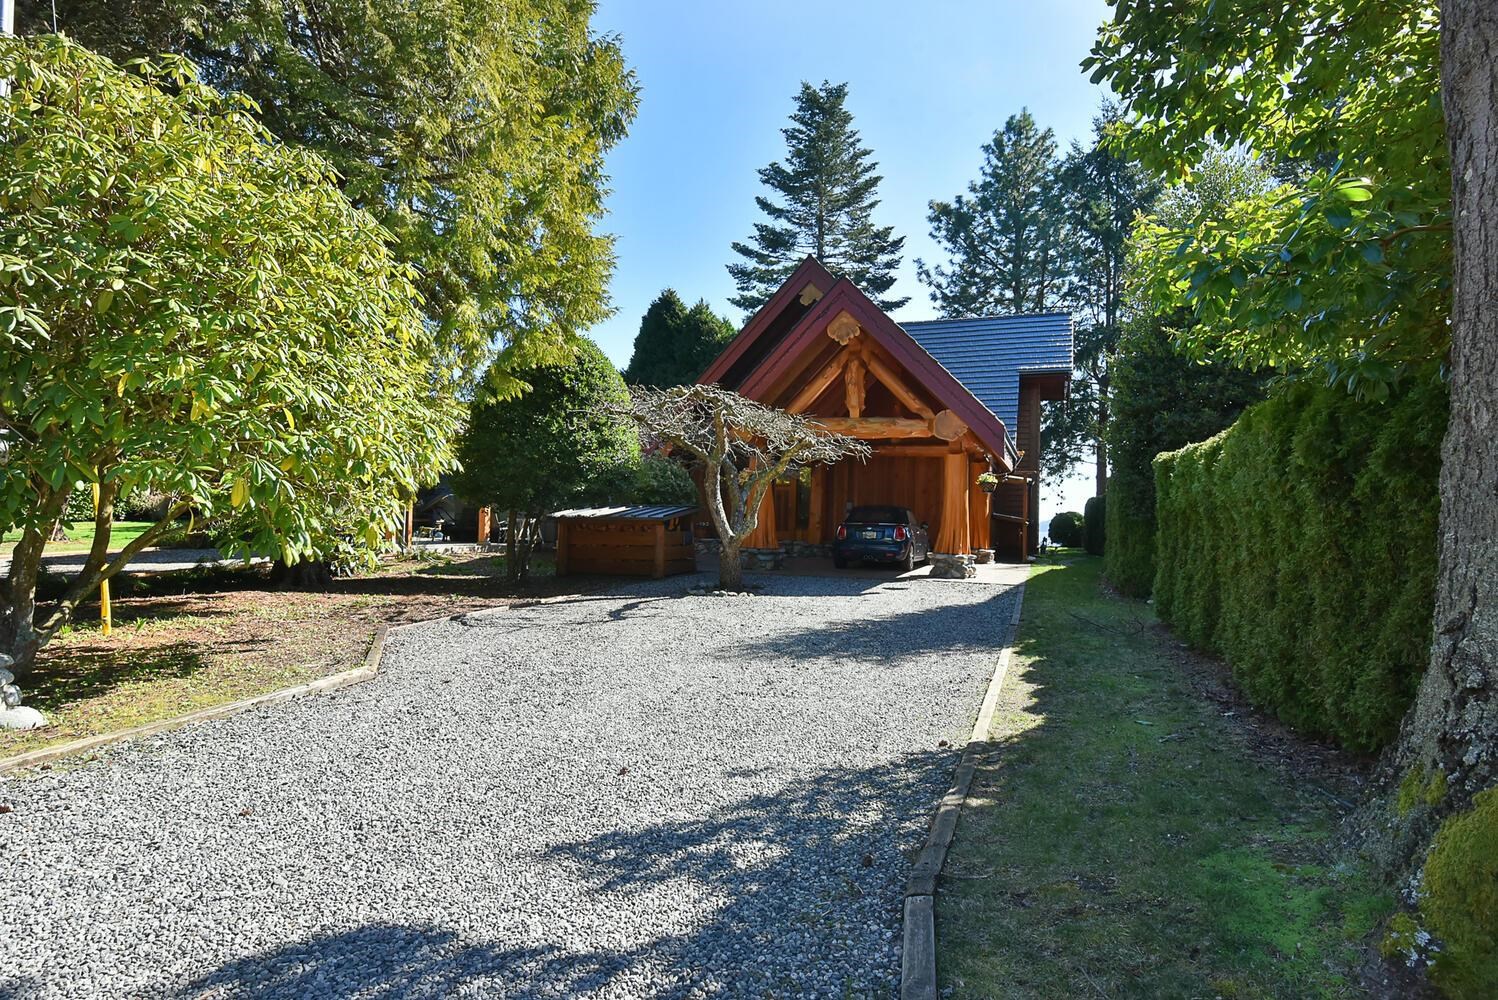 Gibsons & Area House/Single Family for sale:  3 bedroom 3,184 sq.ft. (Listed 2106-02-06)